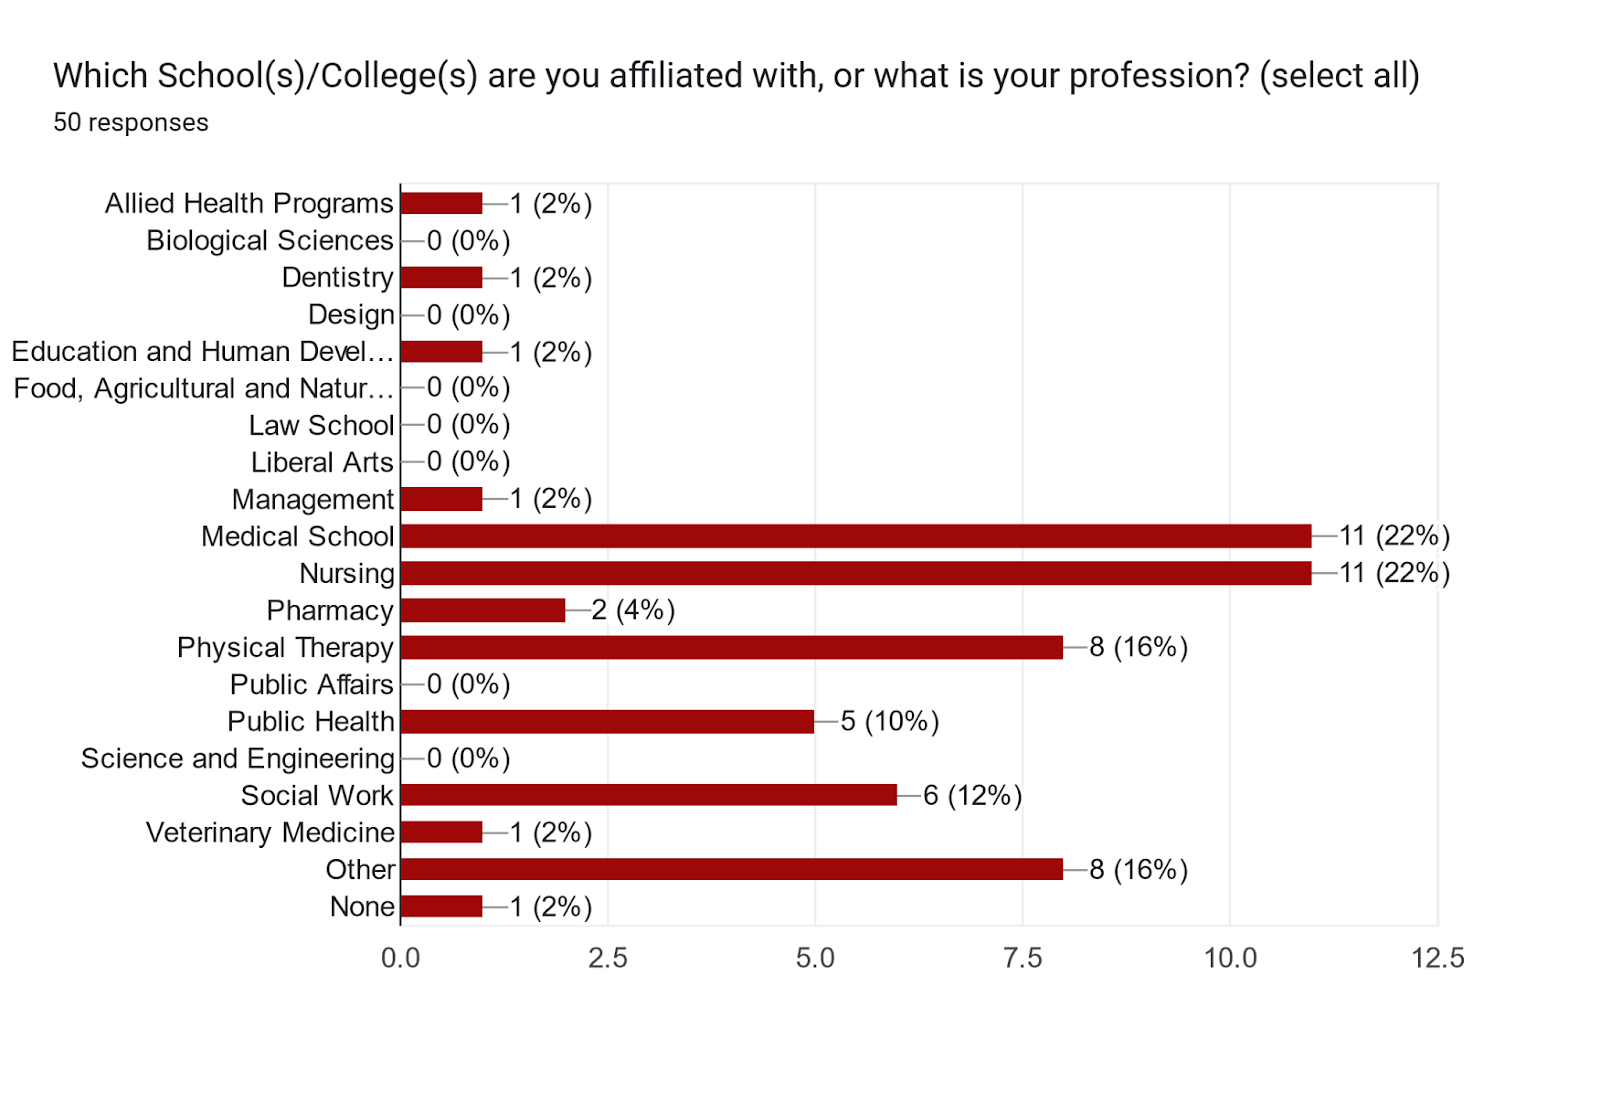 Forms response chart. Question title: Which School(s)/College(s) are you affiliated with, or what is your profession? (select all). Number of responses: 50 responses.